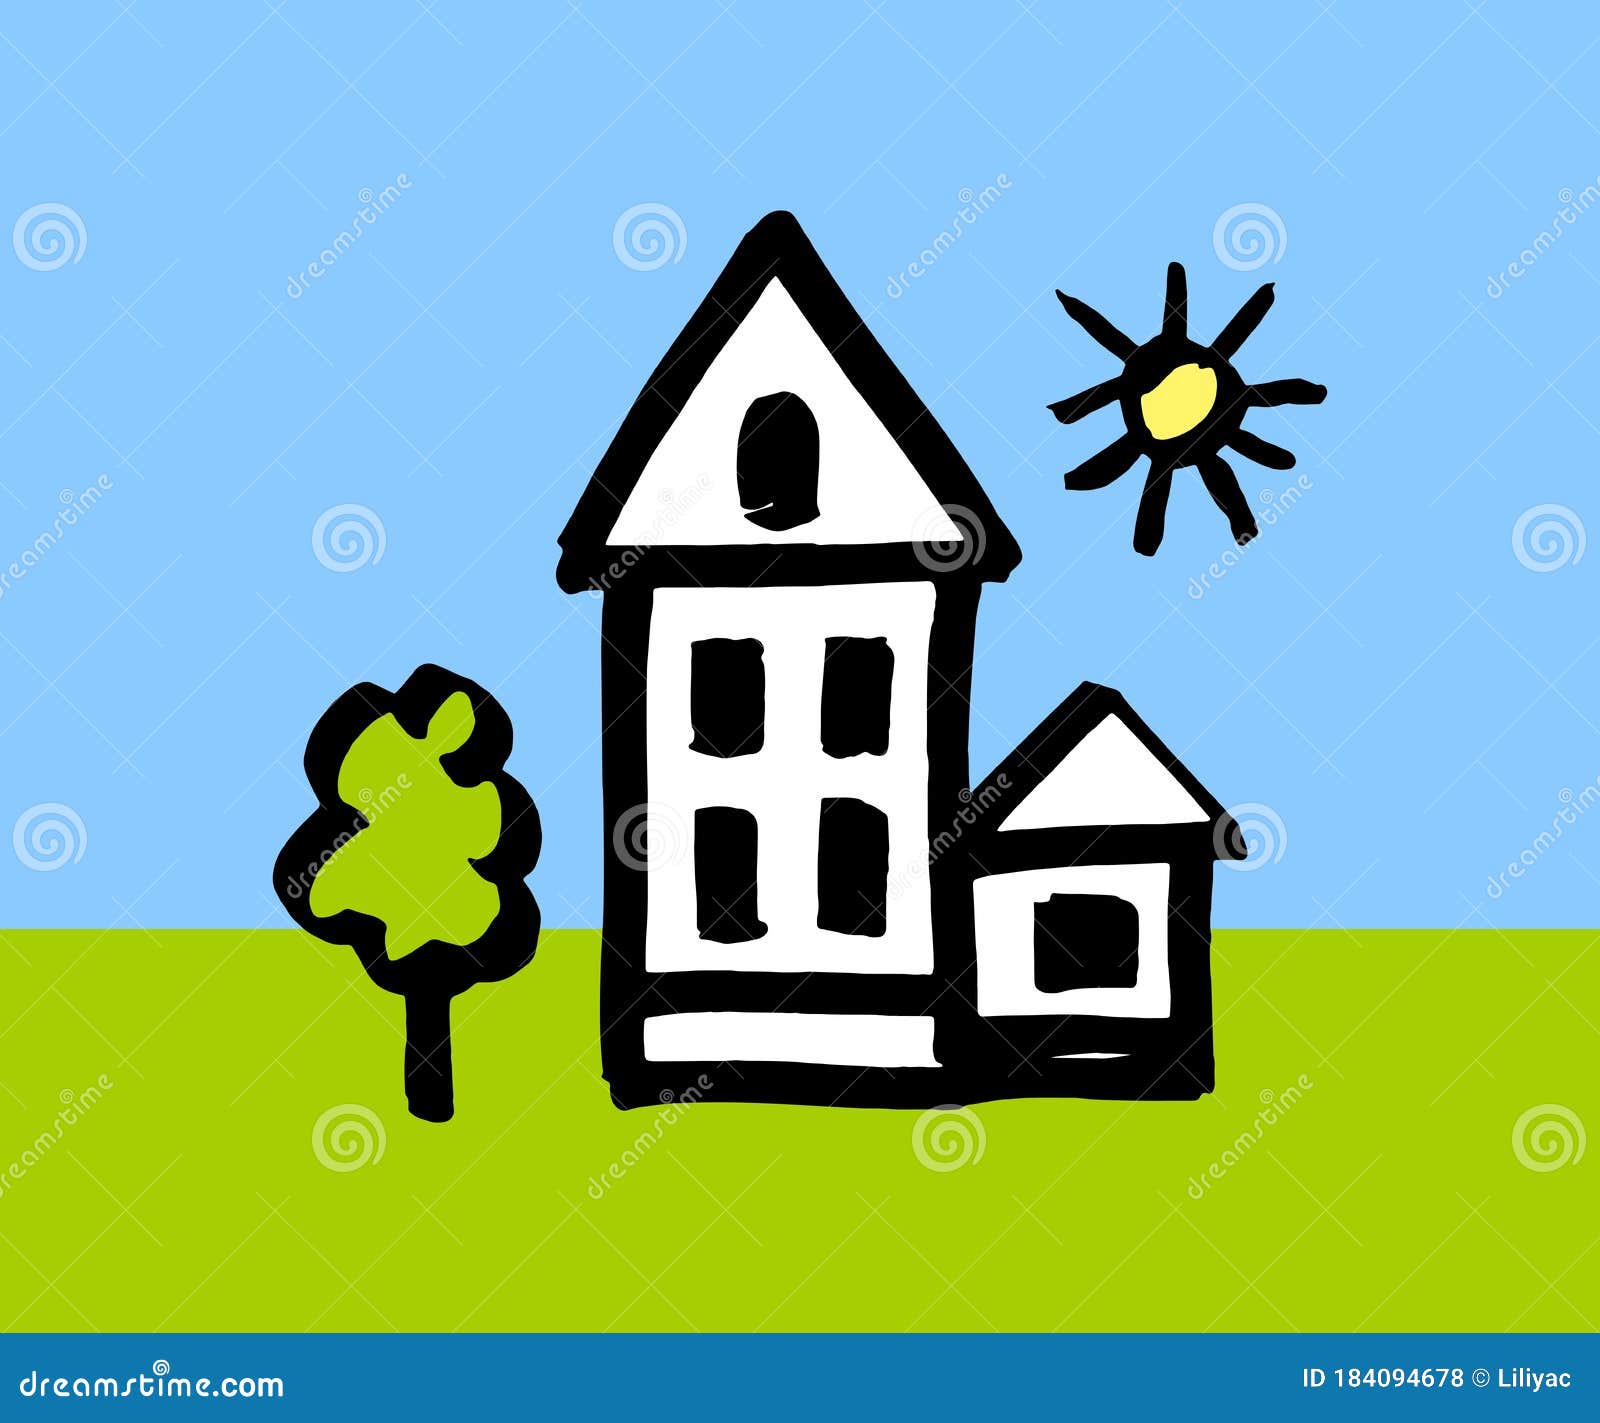 How to Draw a House Easy Printable Lesson For Kids | Kids Activities Blog-saigonsouth.com.vn